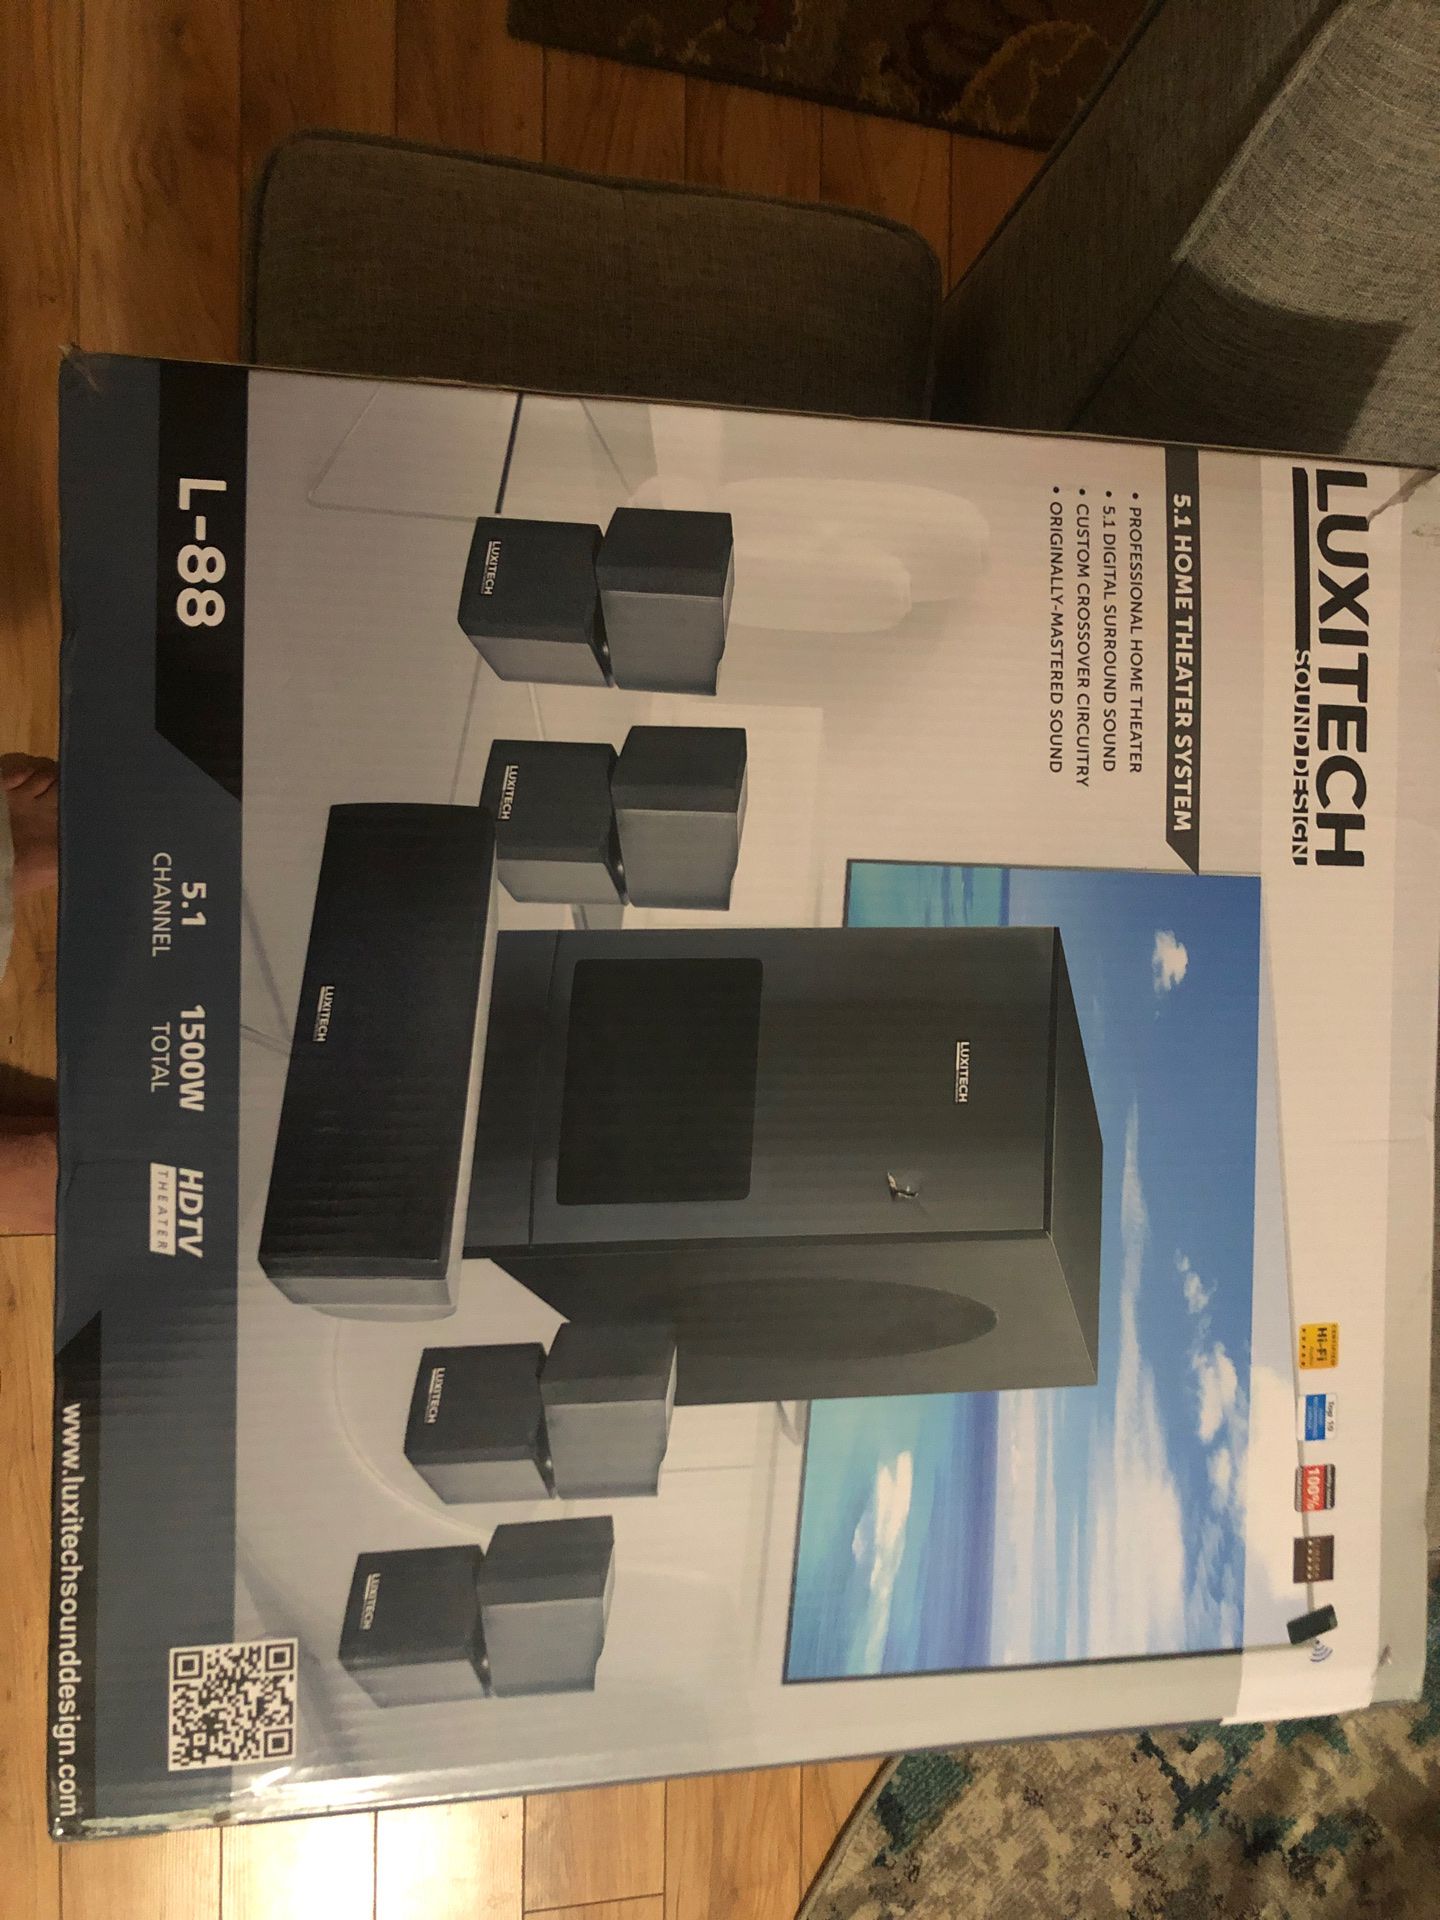 Luxitech home theater system. Brand new in the box.